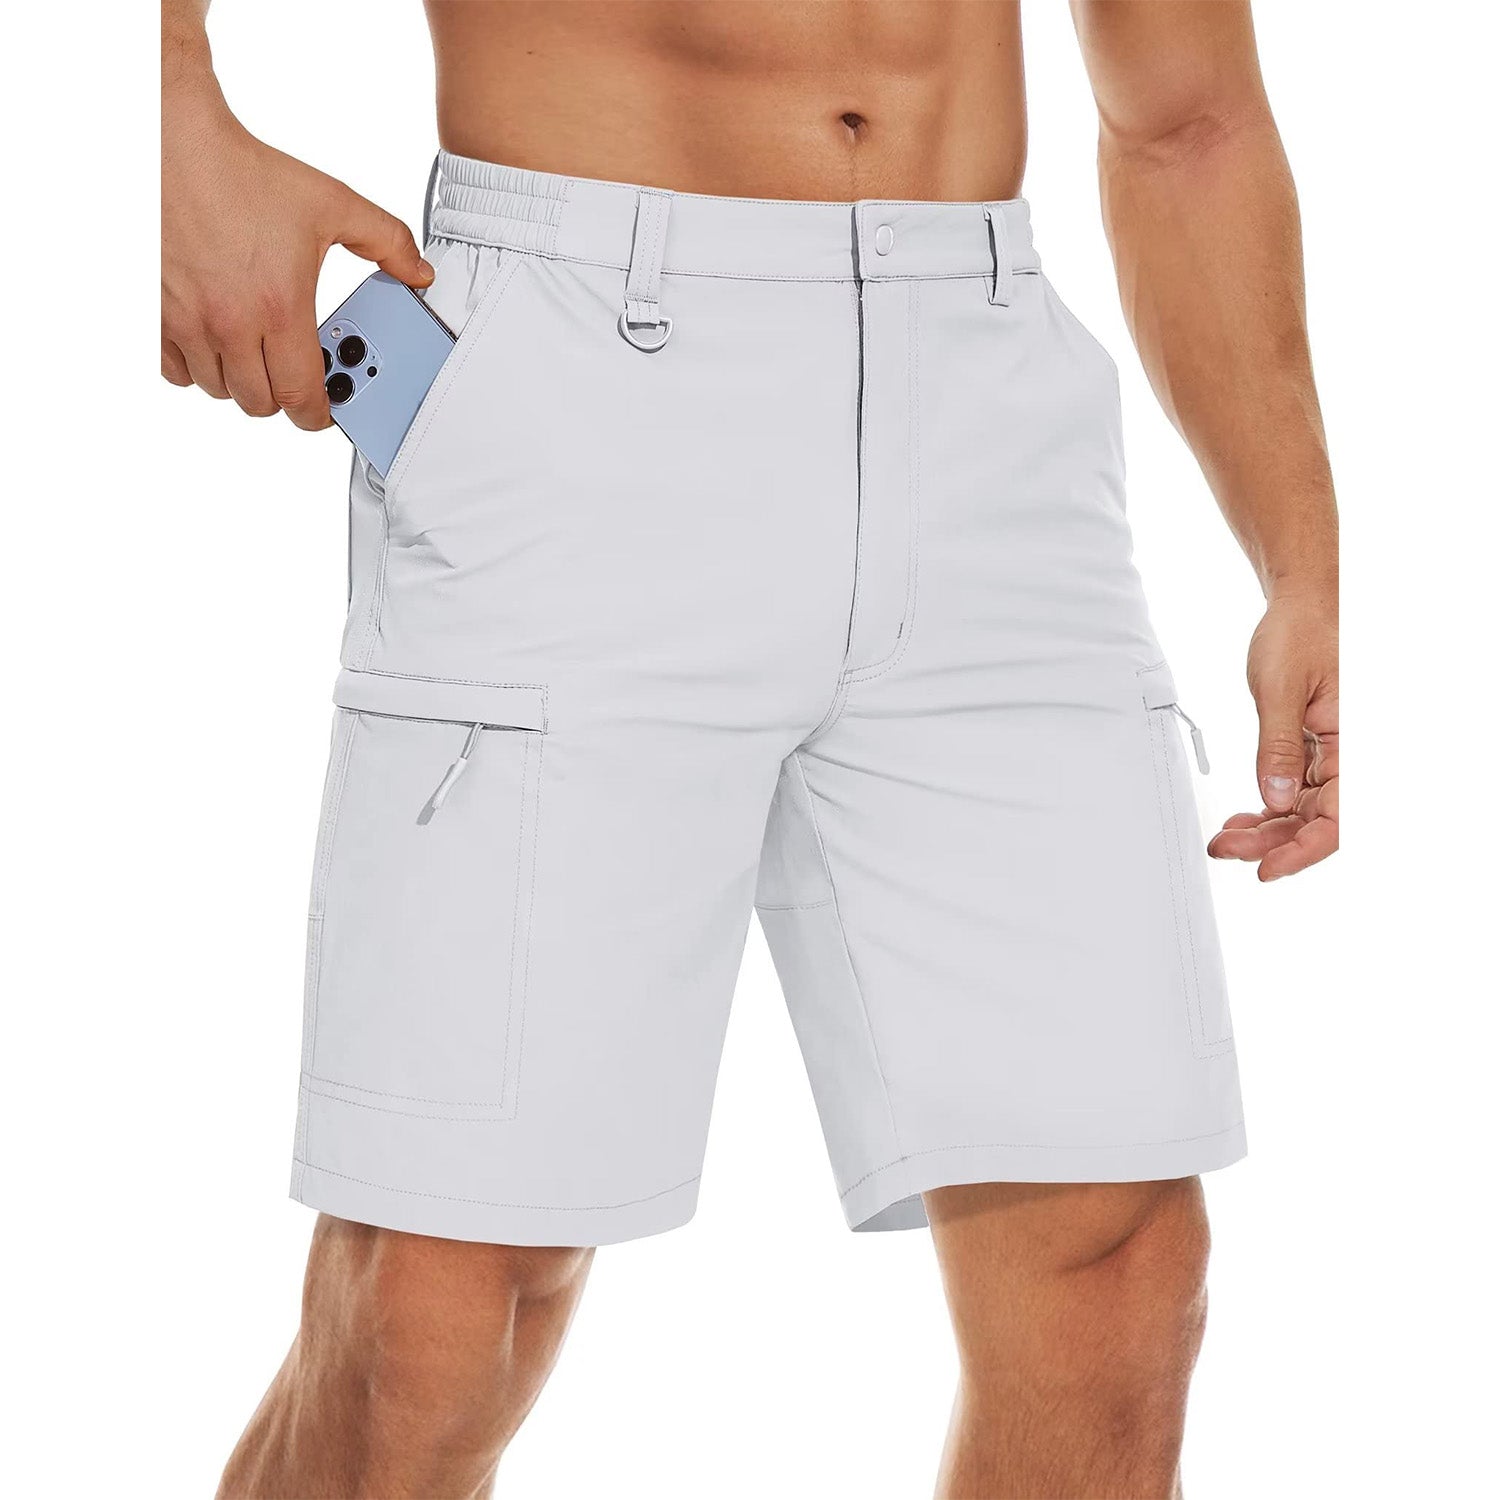 【Buy 4 Get the 4th Free!】Men's Hiking Shorts 5 Pockets Water-Resistant Ripstop Quick Dry Outdoor Shorts